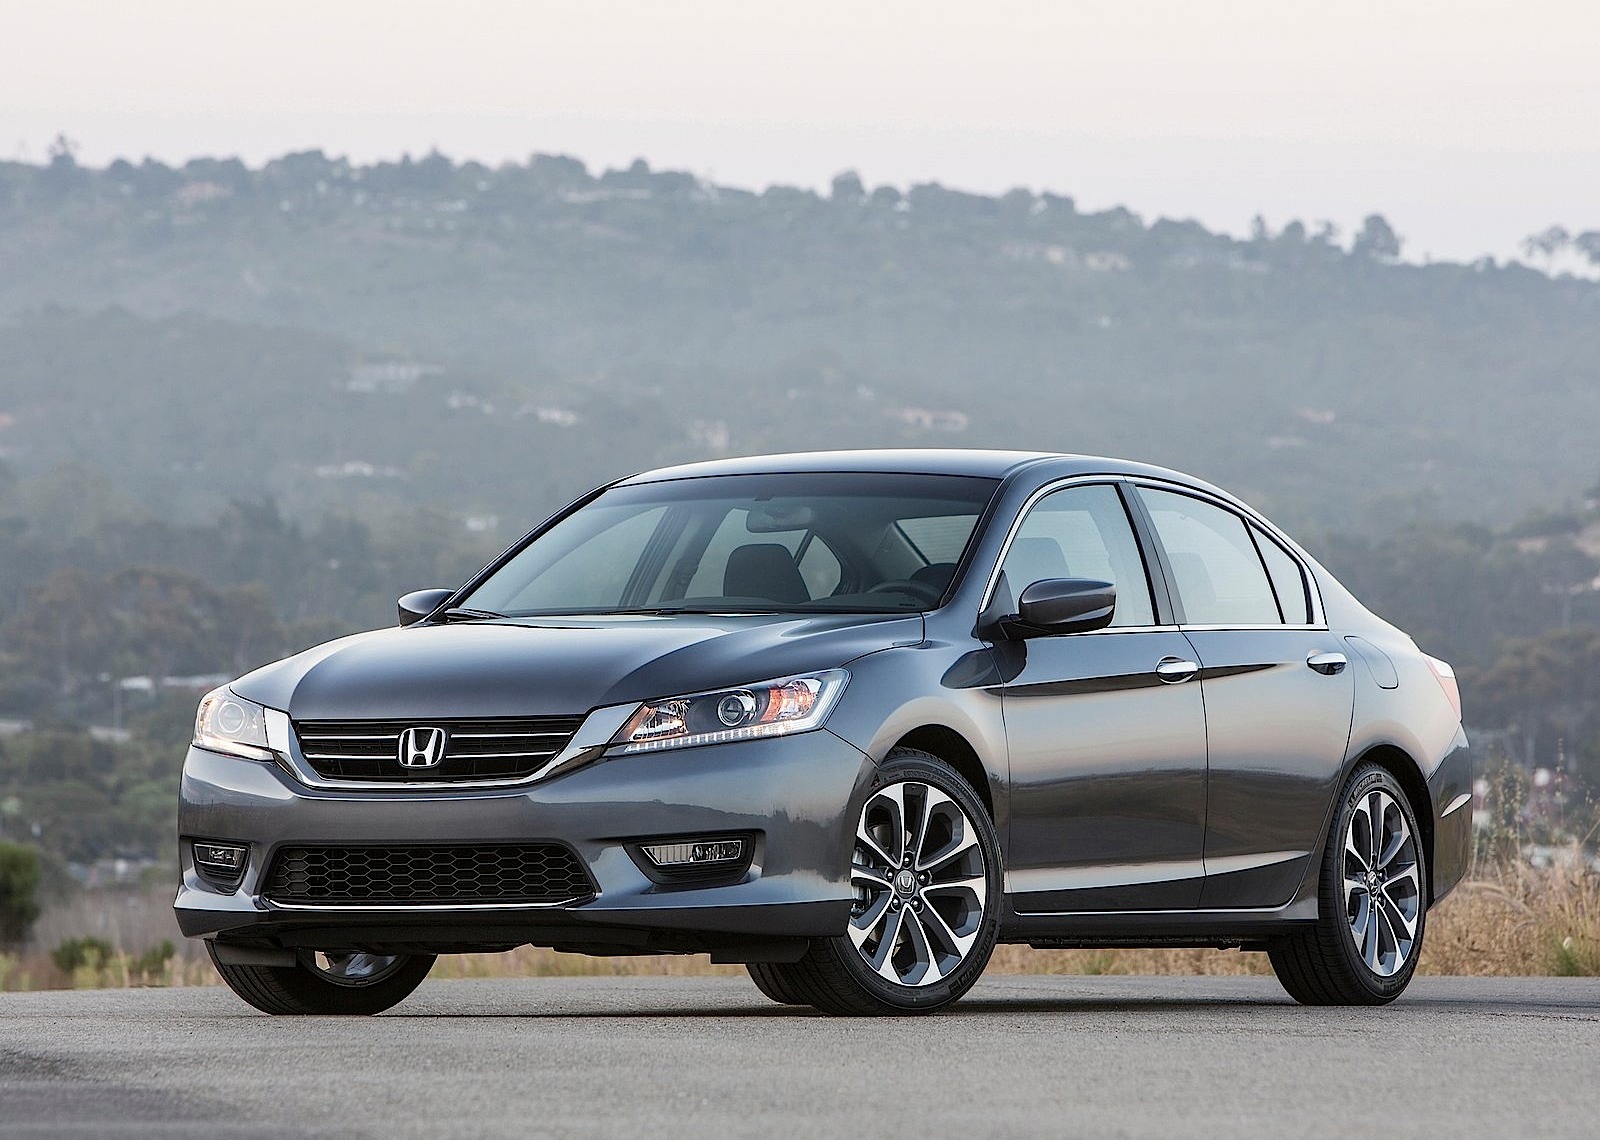 Honda Accord 9th Generation Exterior Front Side View